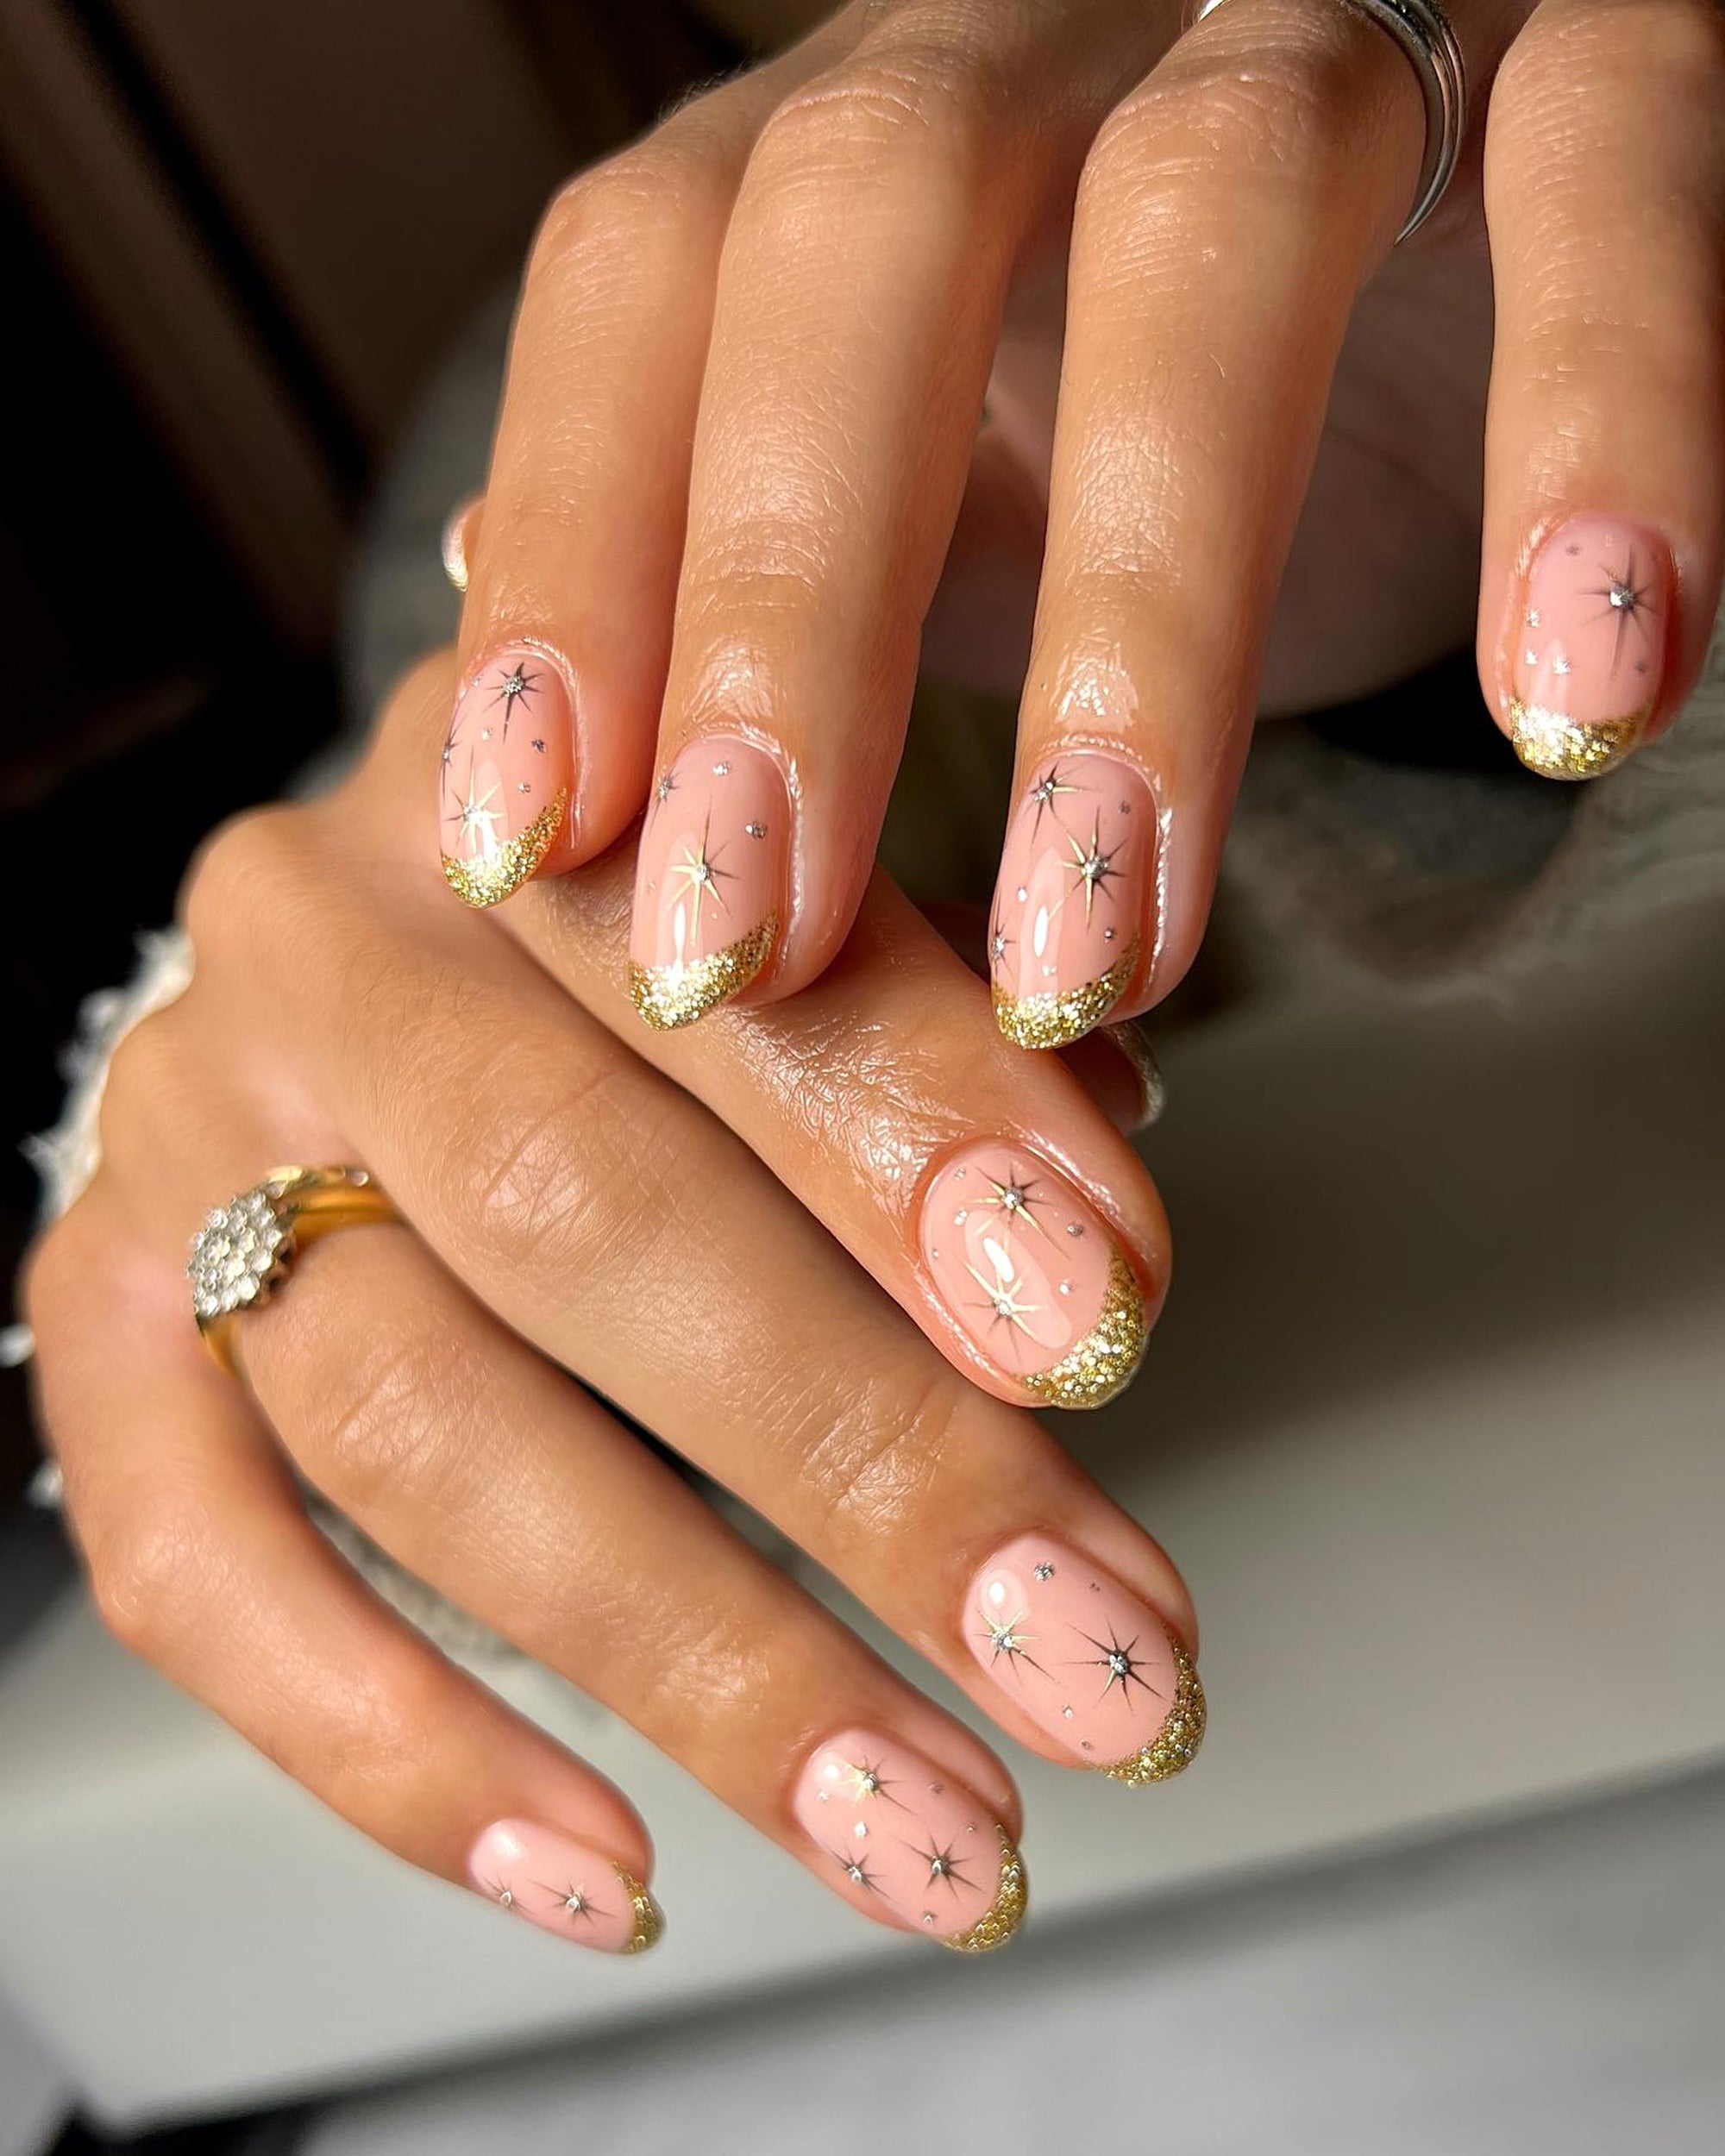 Short Acrylic Overlay on her own nails, no tips👌it looks natural and  suitable for Doctors, Nurses, Chefs, Engineers, and all kinds of ... |  Instagram